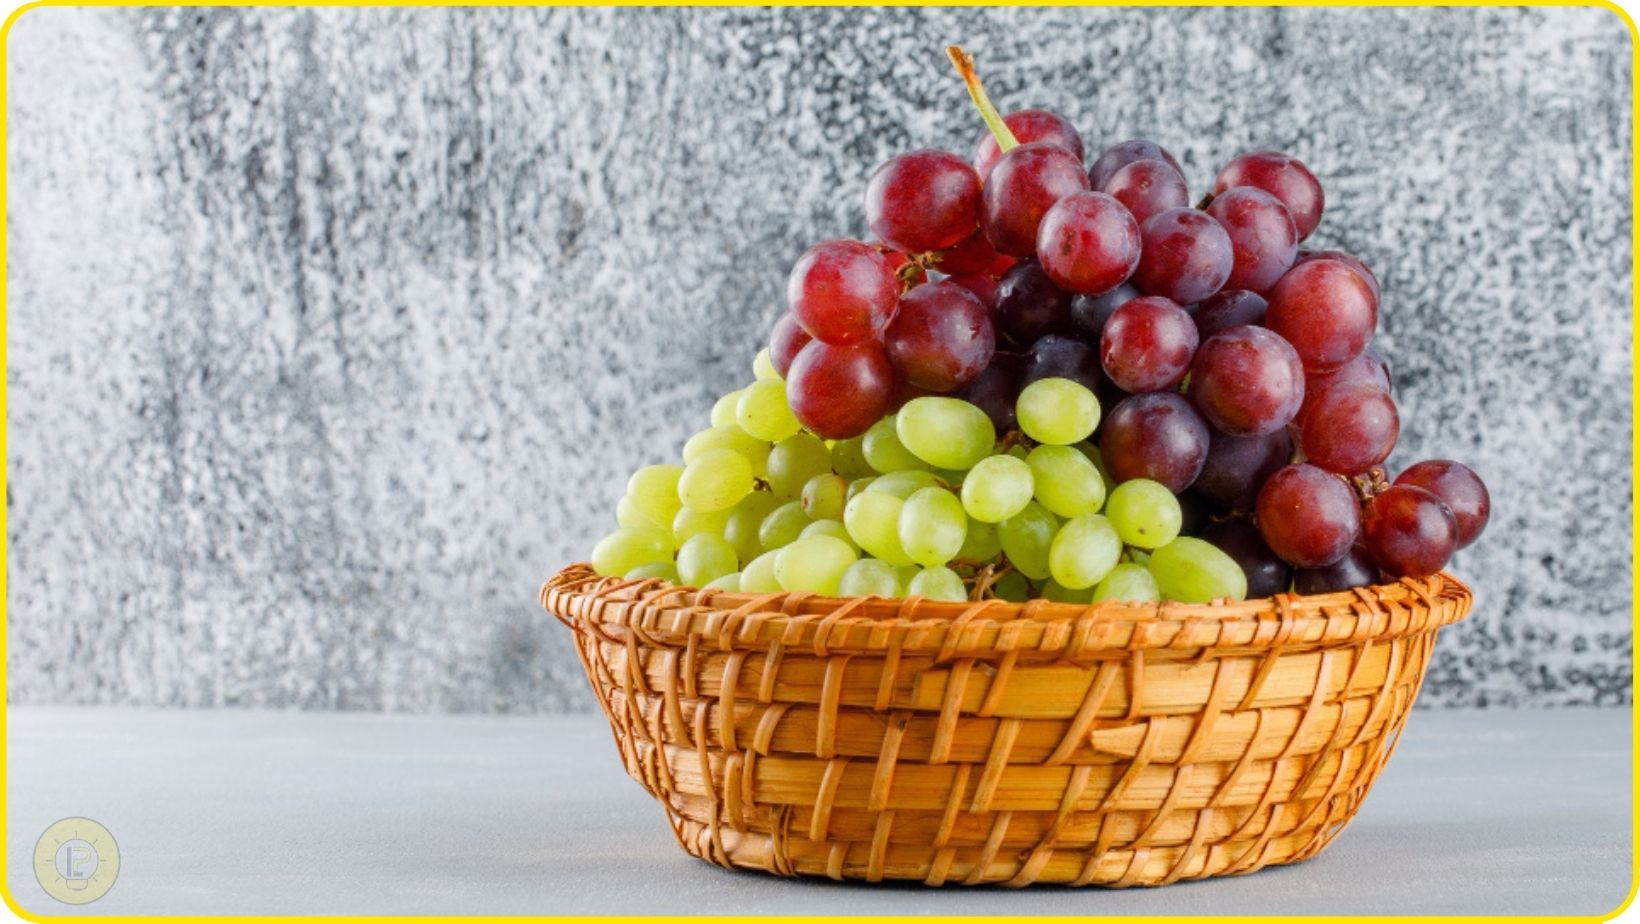 Grapes for Constipation